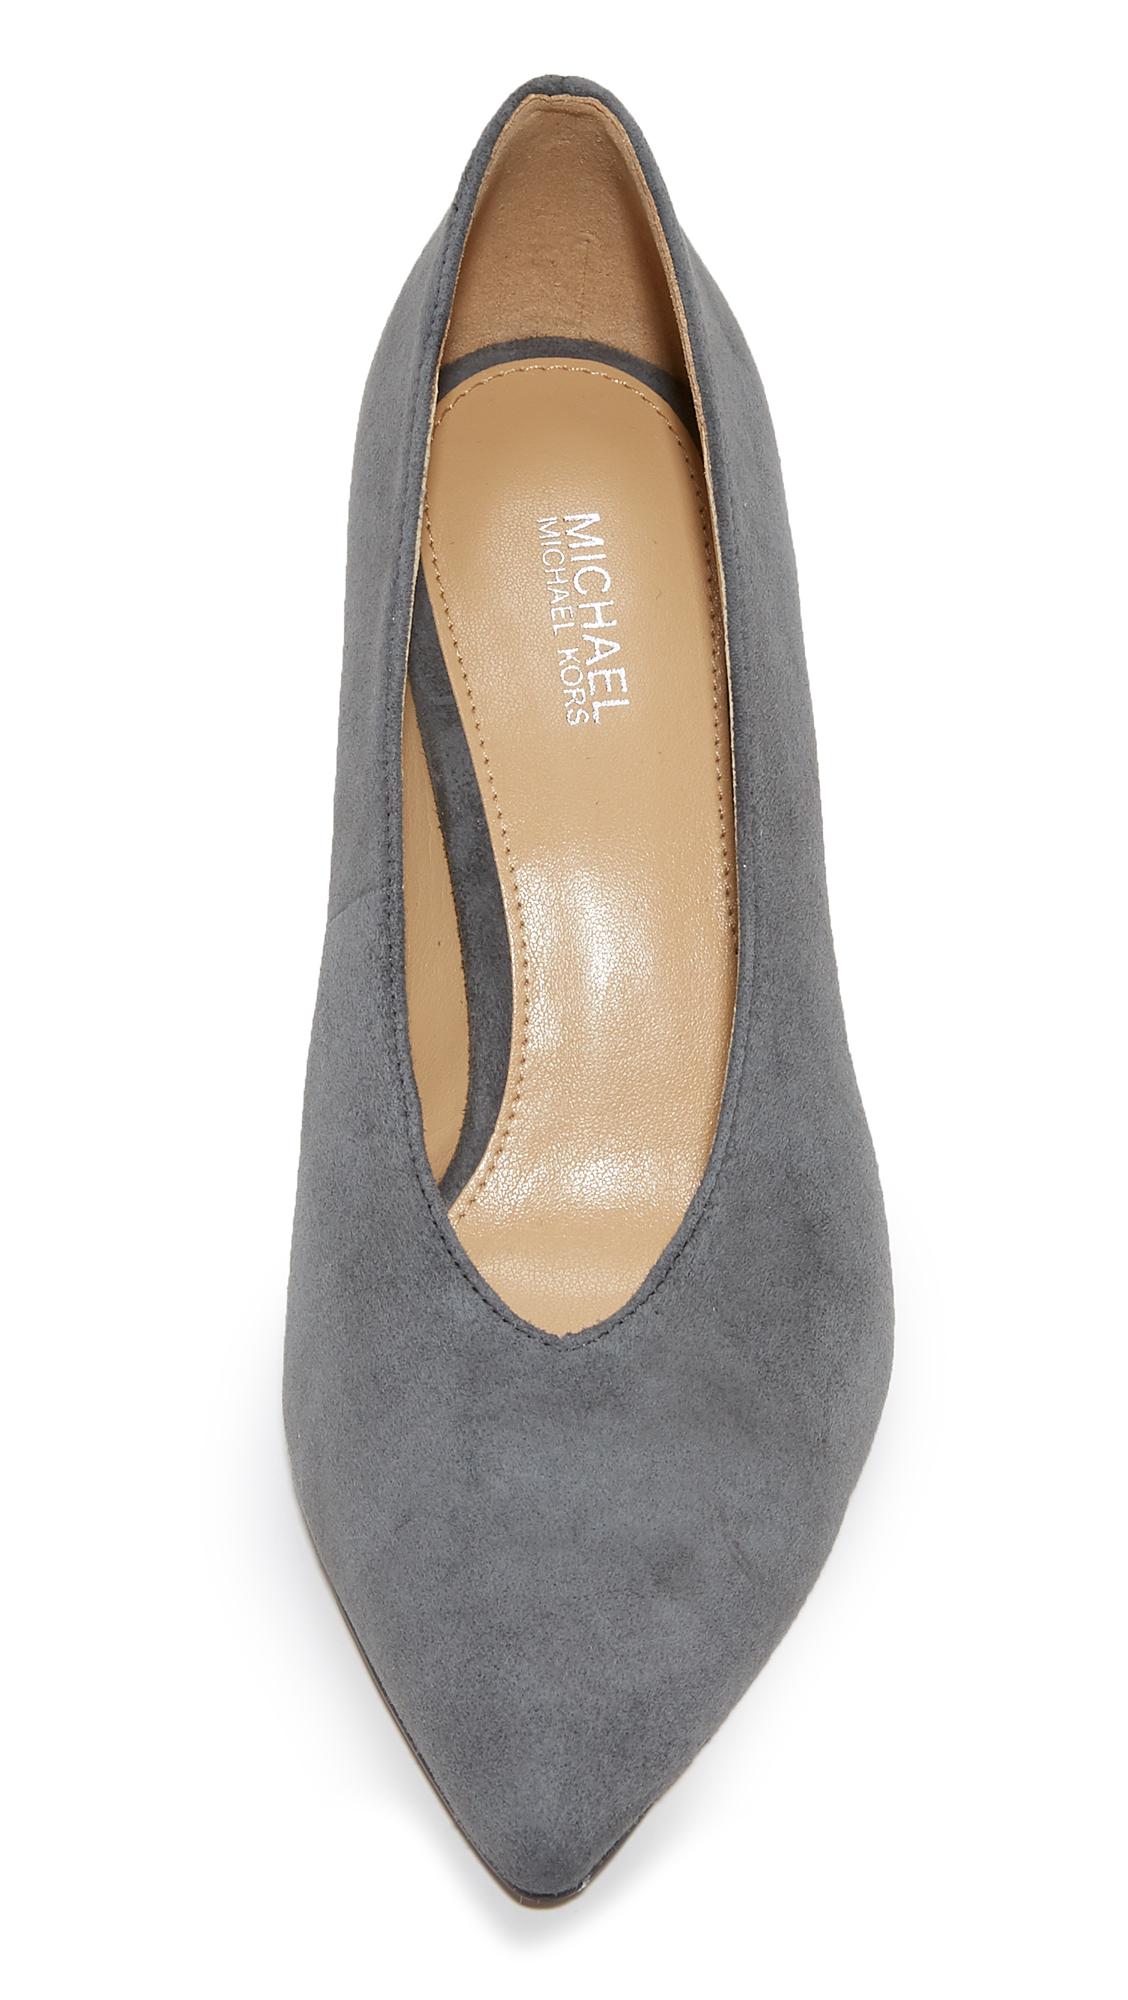 MICHAEL Michael Lizzy Mid Pumps in Charcoal (Gray) - Lyst